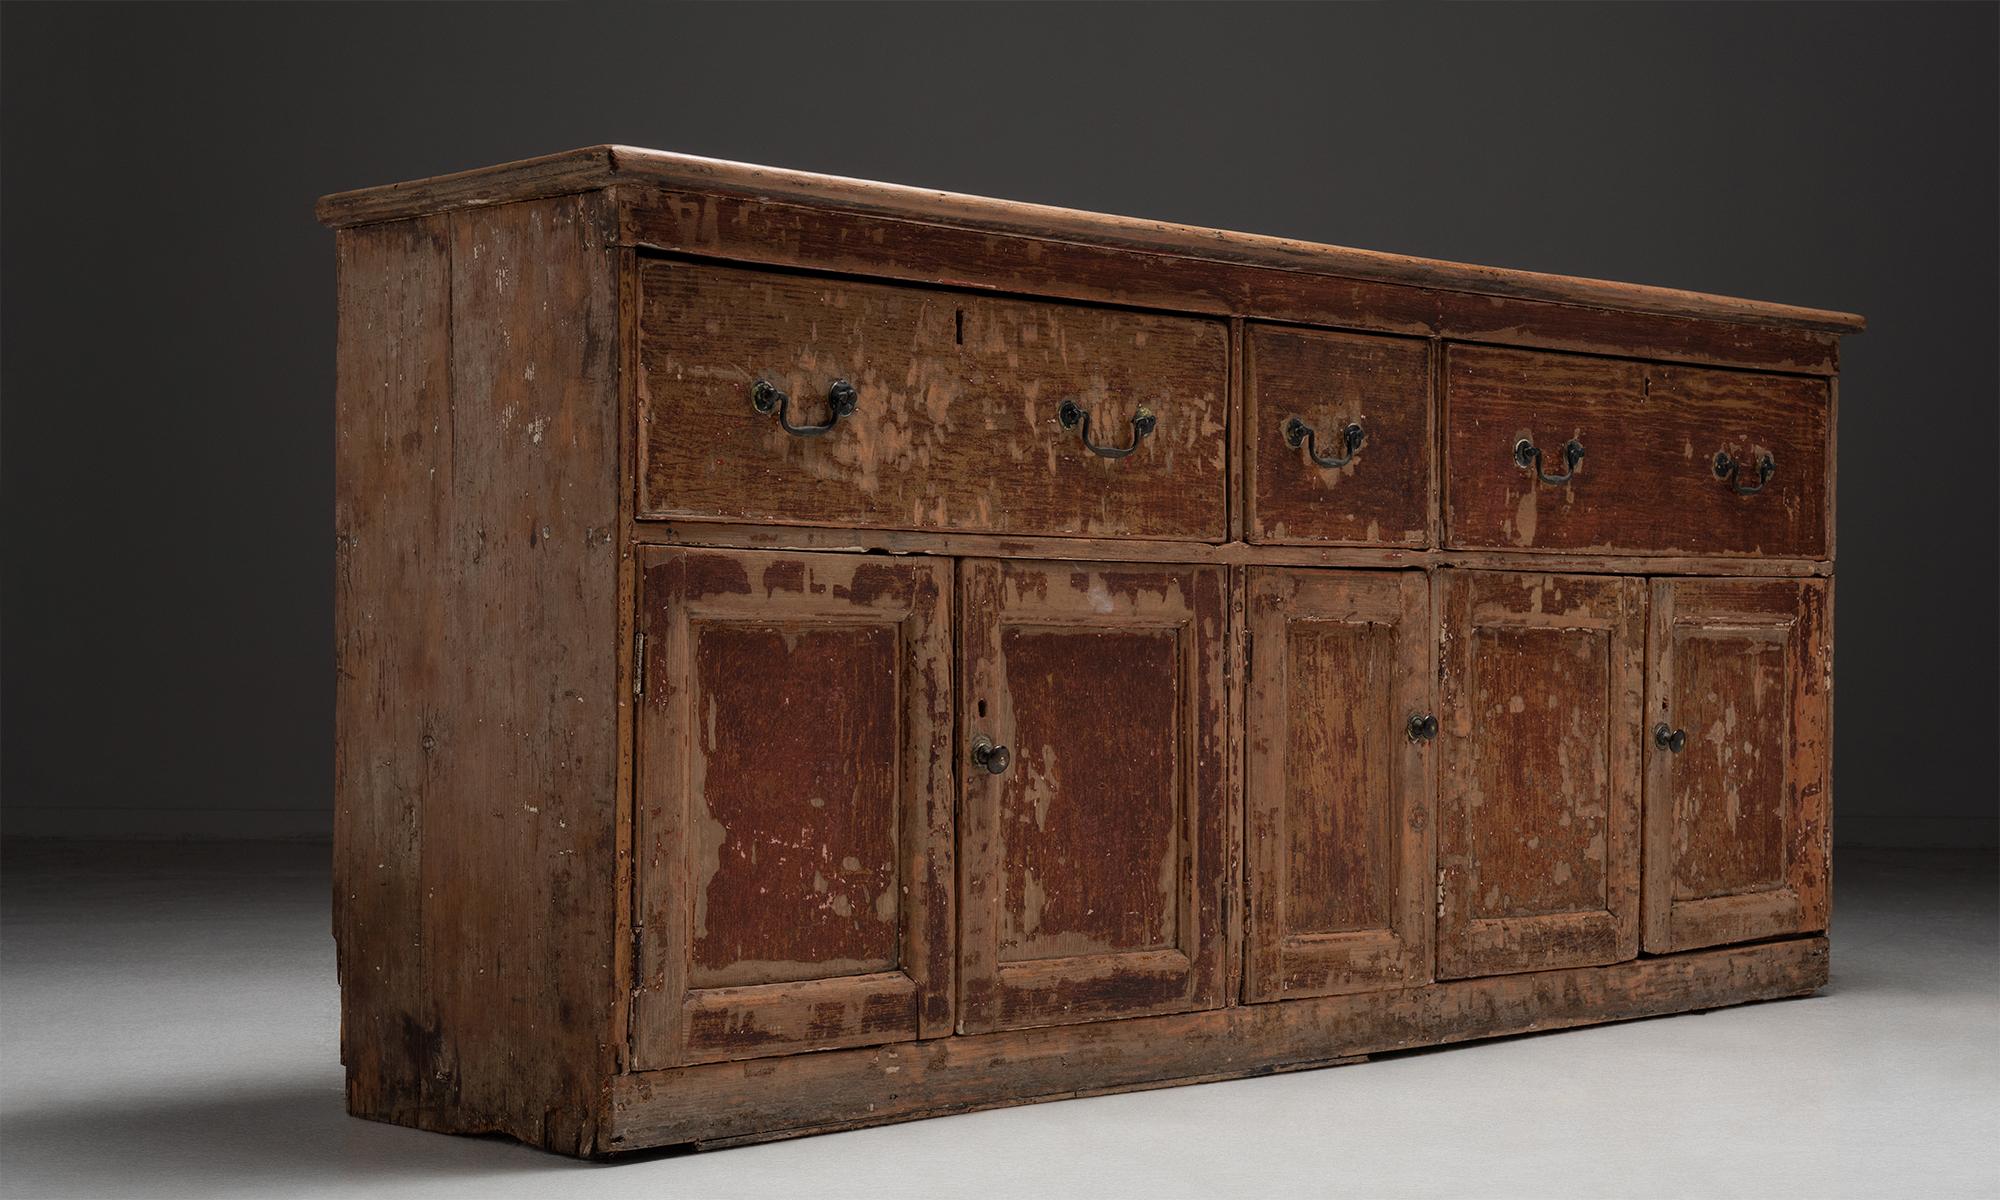 Estate chest of drawers

England Circa 1810

Weathered storage piece with drawers on top and cupboard storage on bottom. Original painted surface.

Measures: 77.5” W x 17.5” D x 34” H.